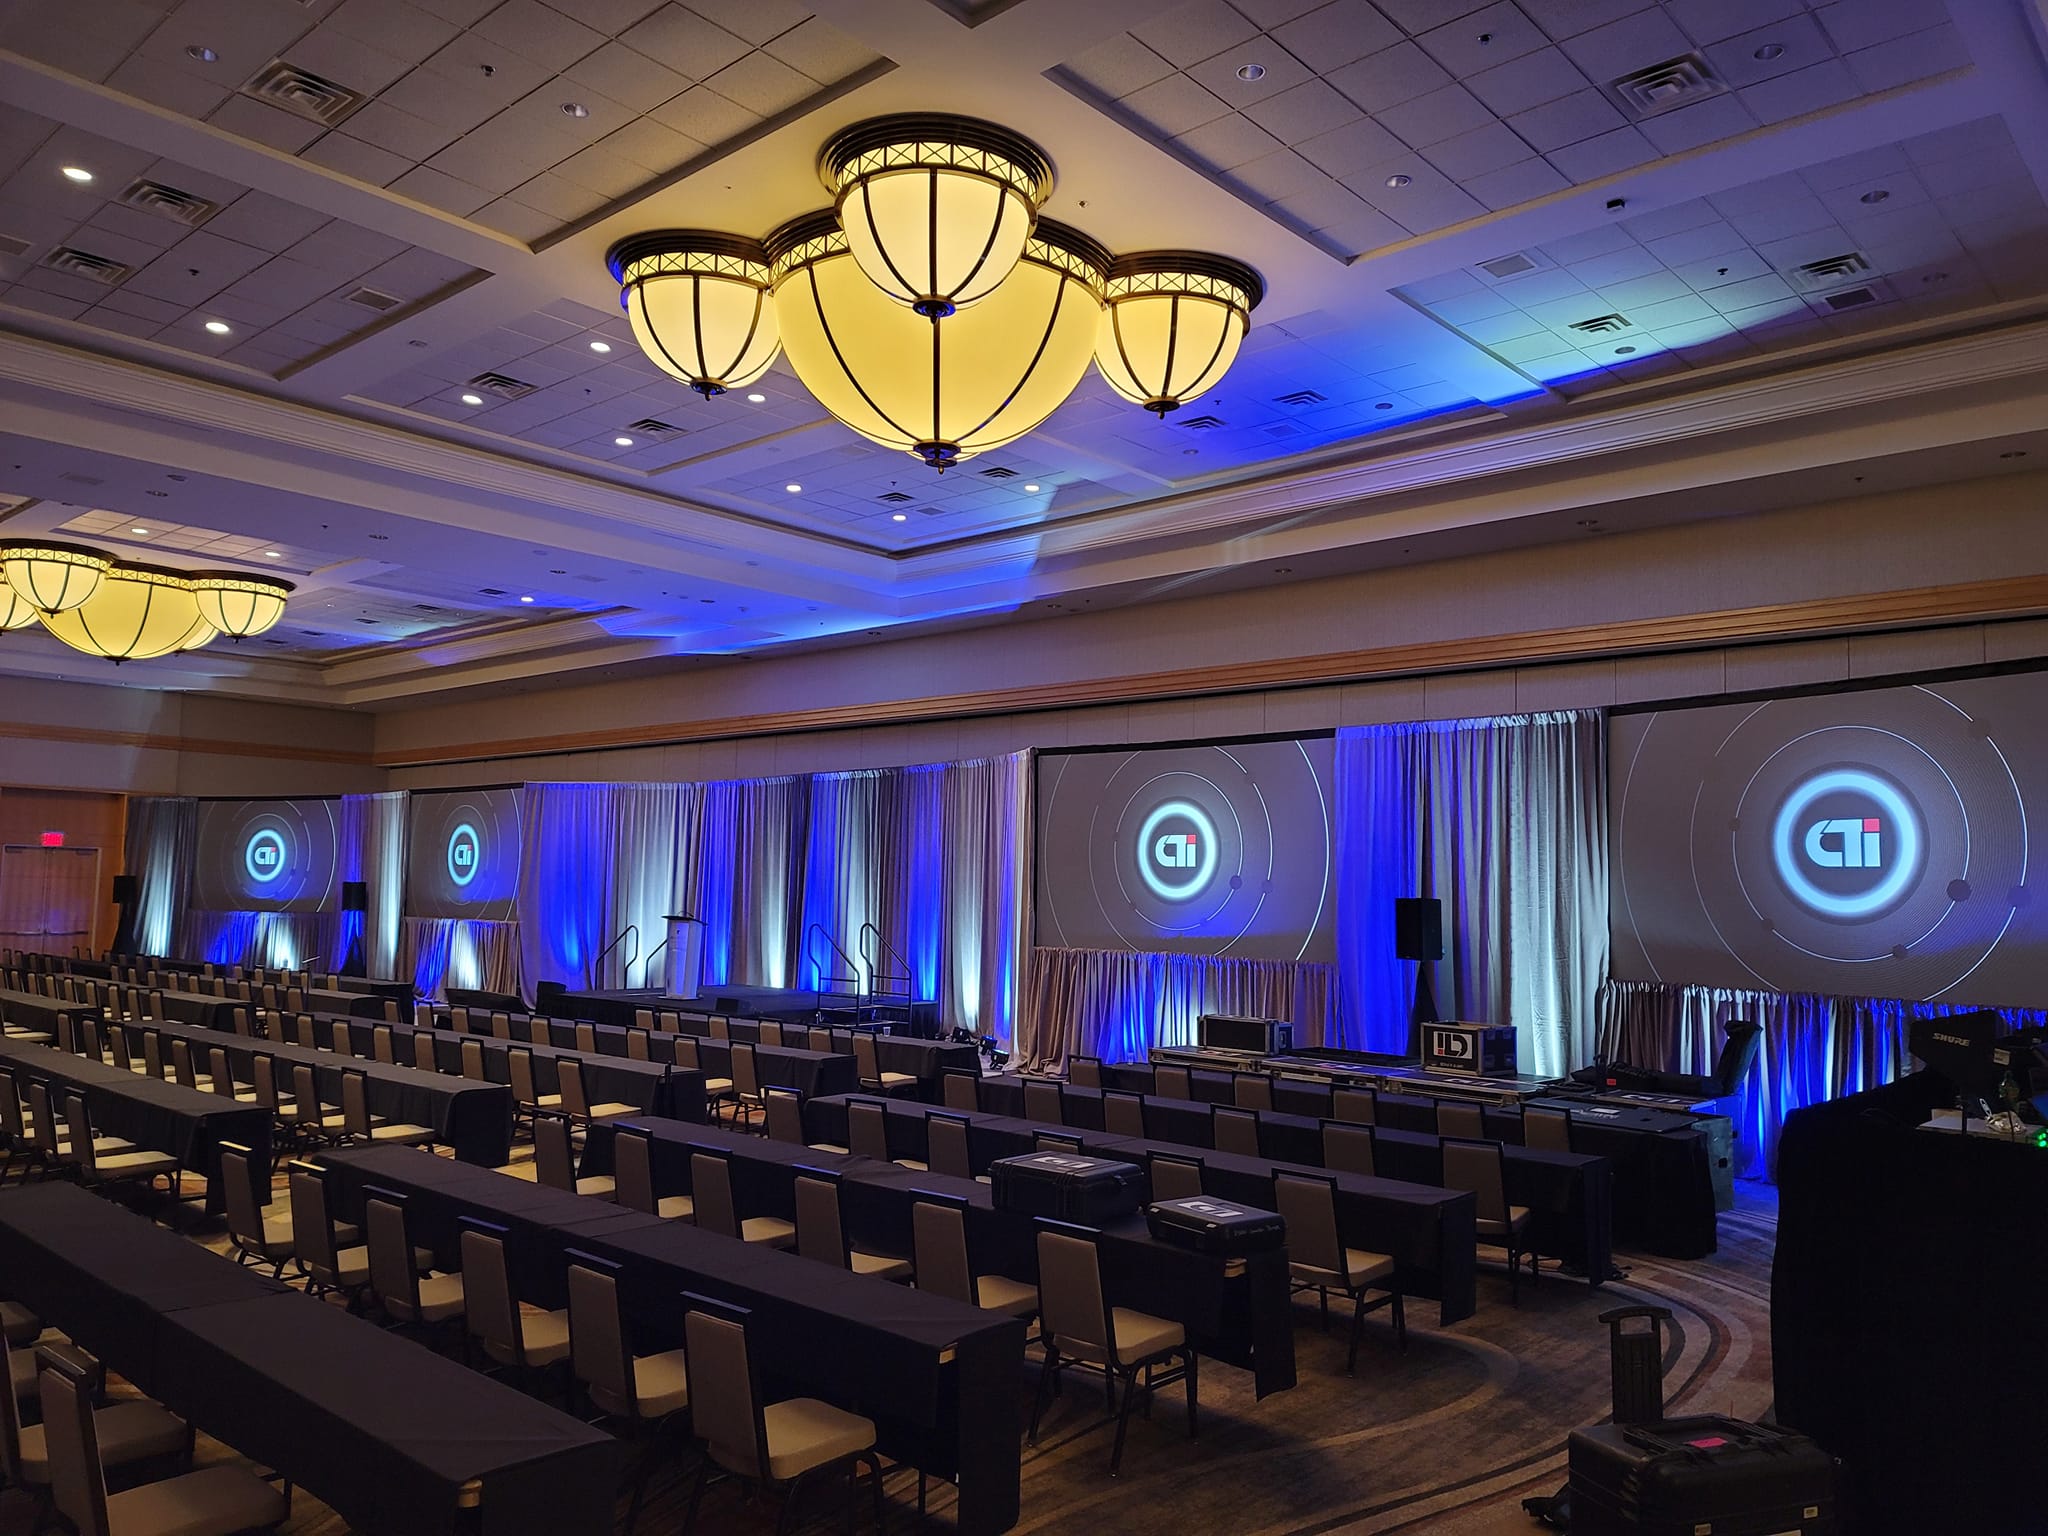 Large screens at an event space